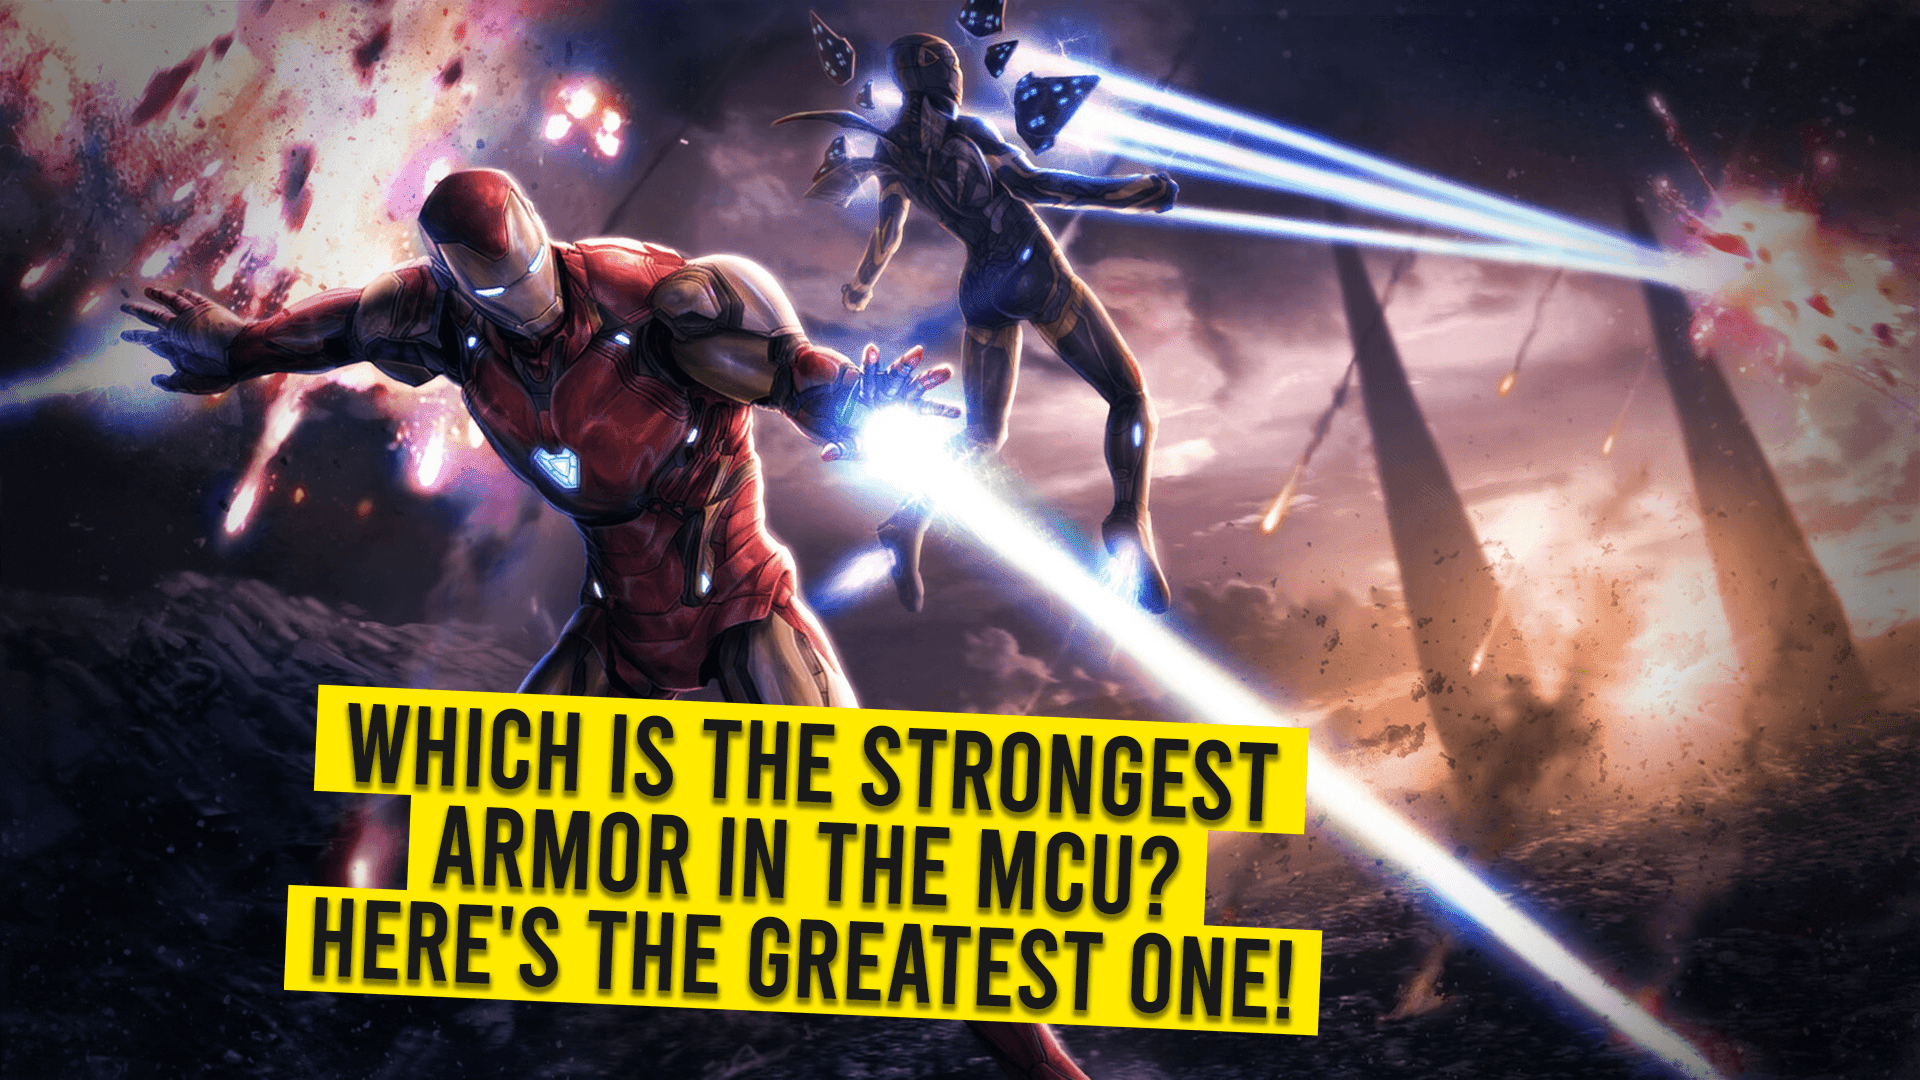 The strongest Armor in the MCU are not the Hulkbuster - Or Even an Iron Man Suit